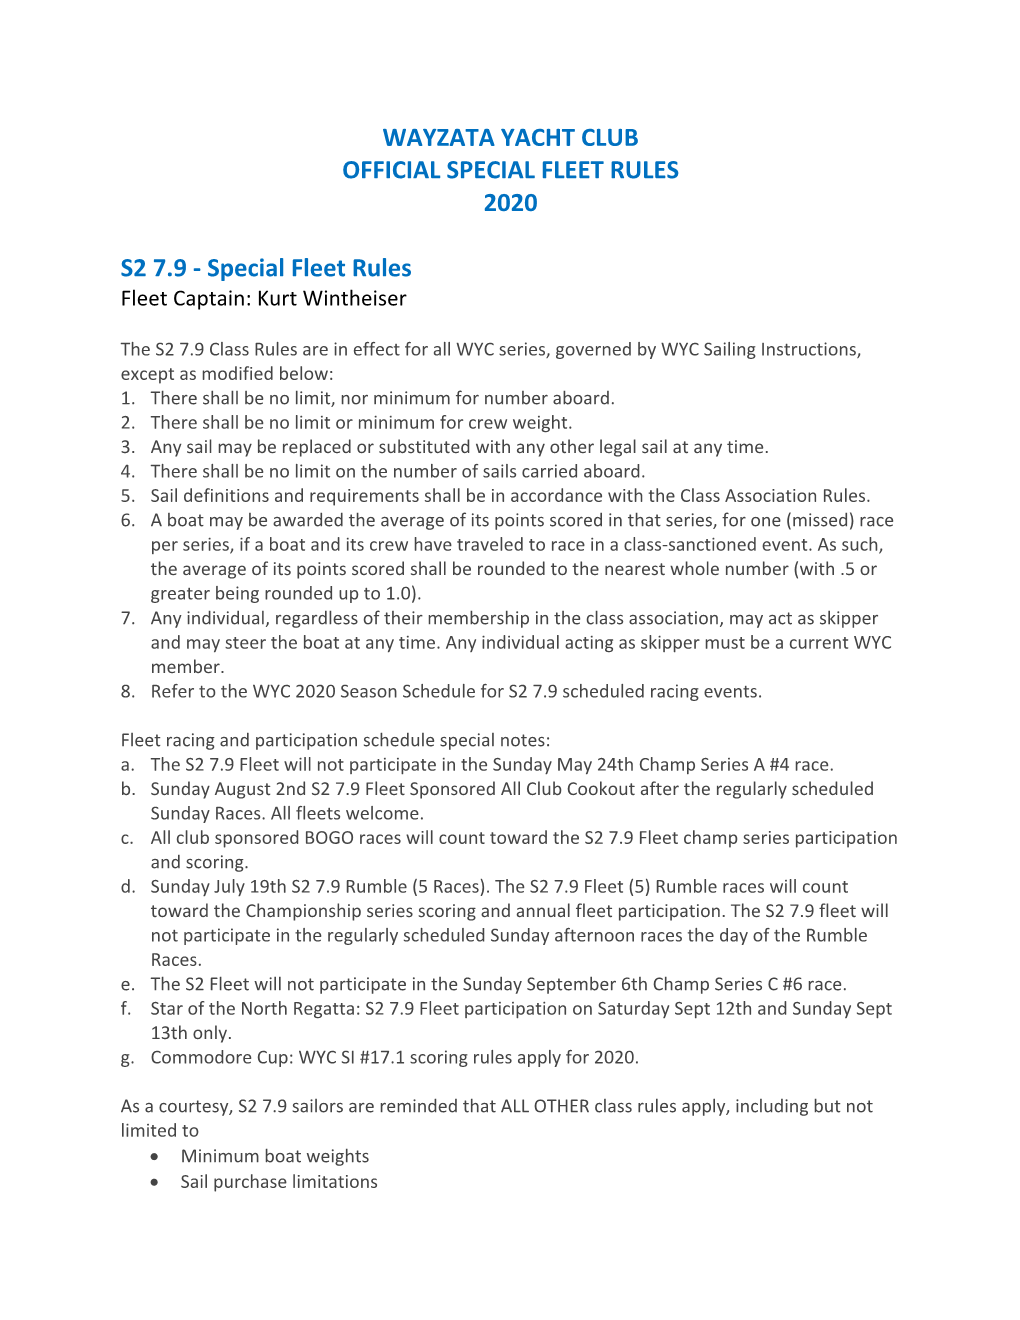 WYC Official Special Fleet Rules 2020